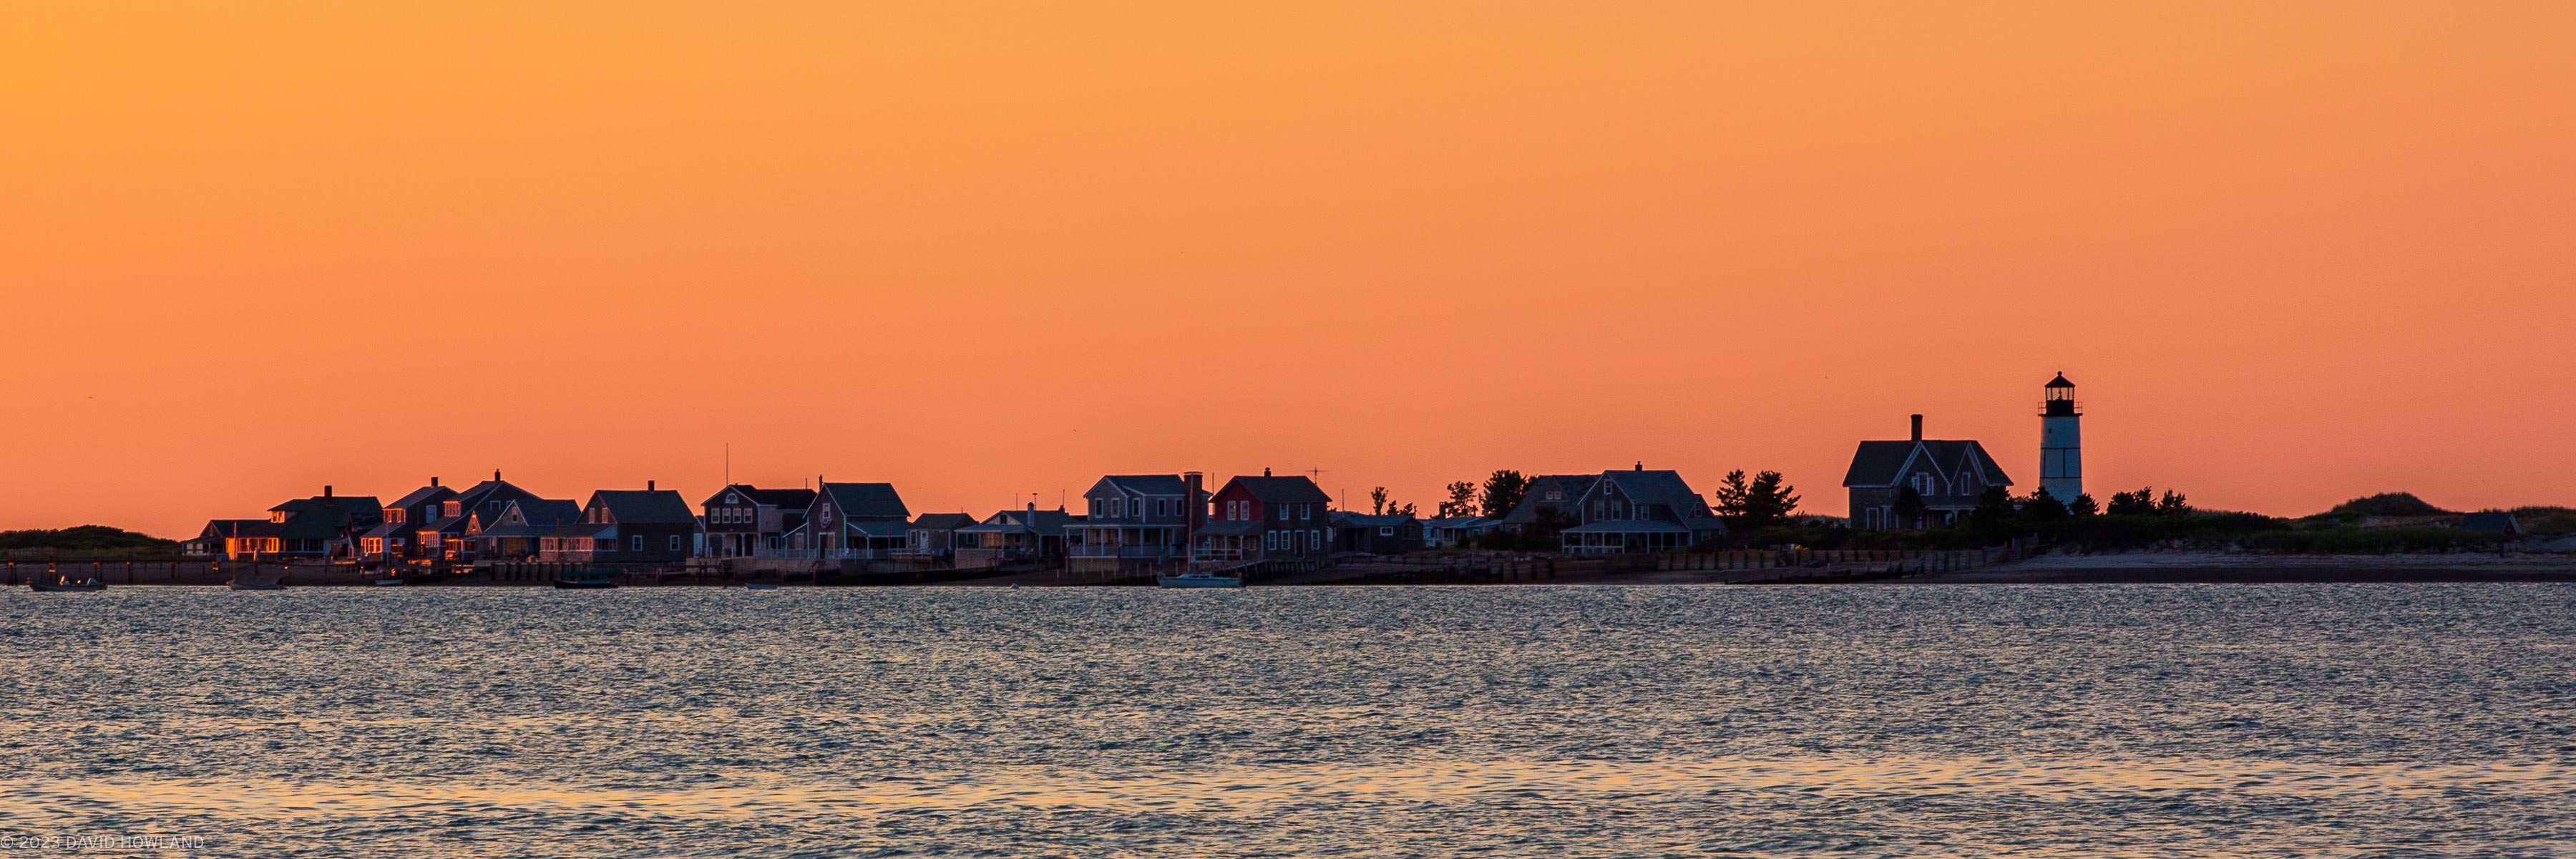 A panorama photo of a bright orange sunset at Sandy Neck Lighthouse in Barnstable, MA on Cape Cod.